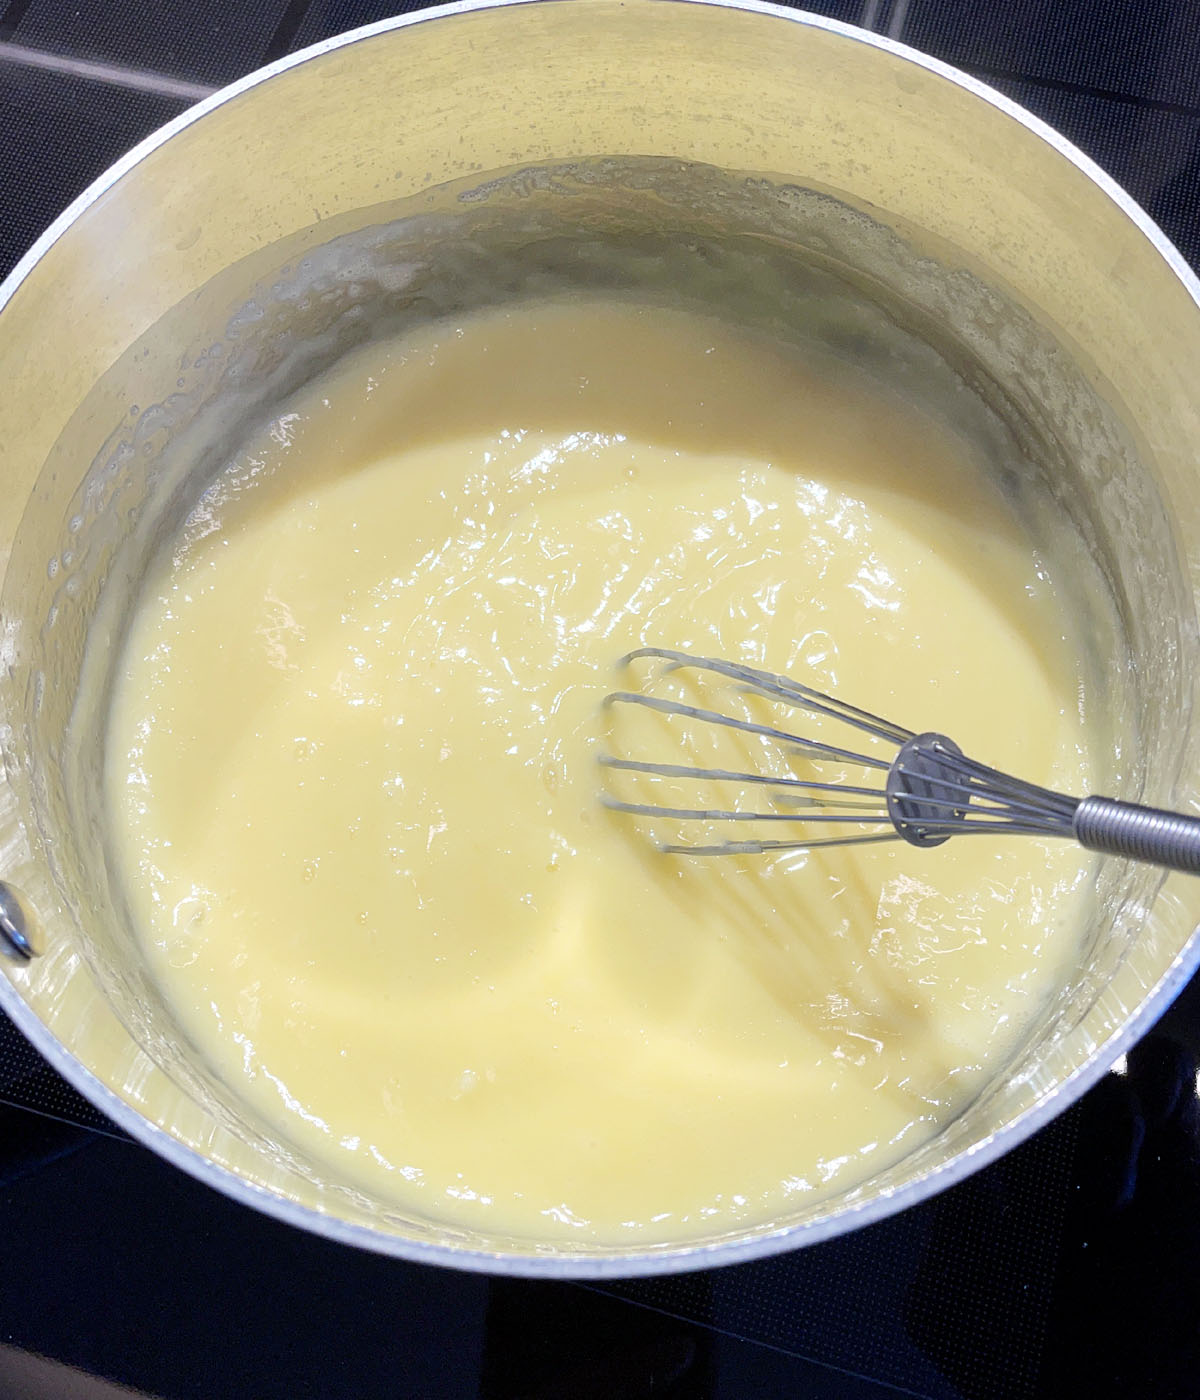 A metal pot containing thick yellow pudding and a whisk.